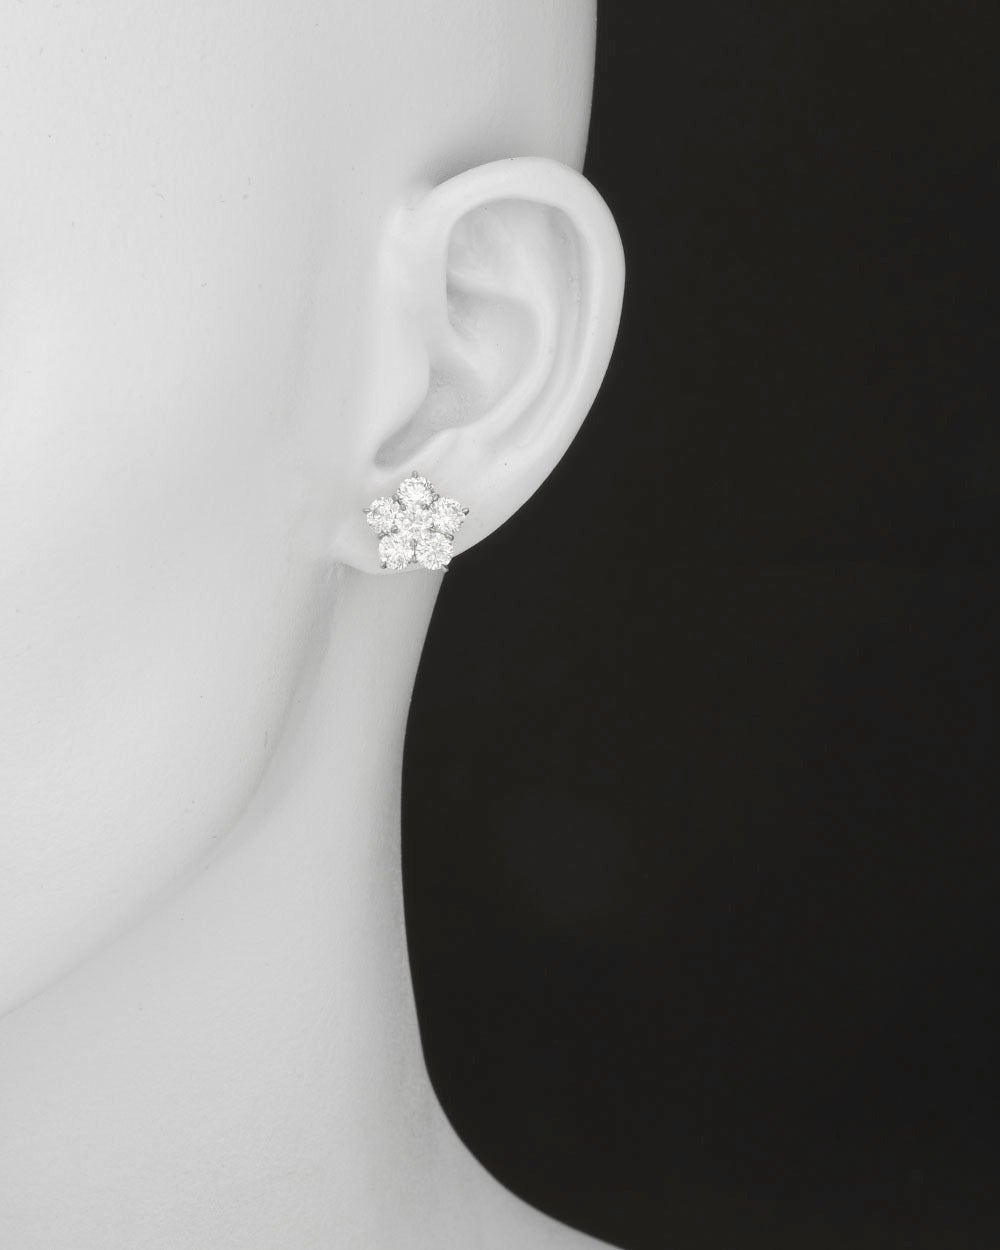 Diamond flower cluster earstuds in platinum. Twelve matching, near-colorless round brilliant cut diamonds weighing 5.04 total carats, prong-set in platinum with posts and 